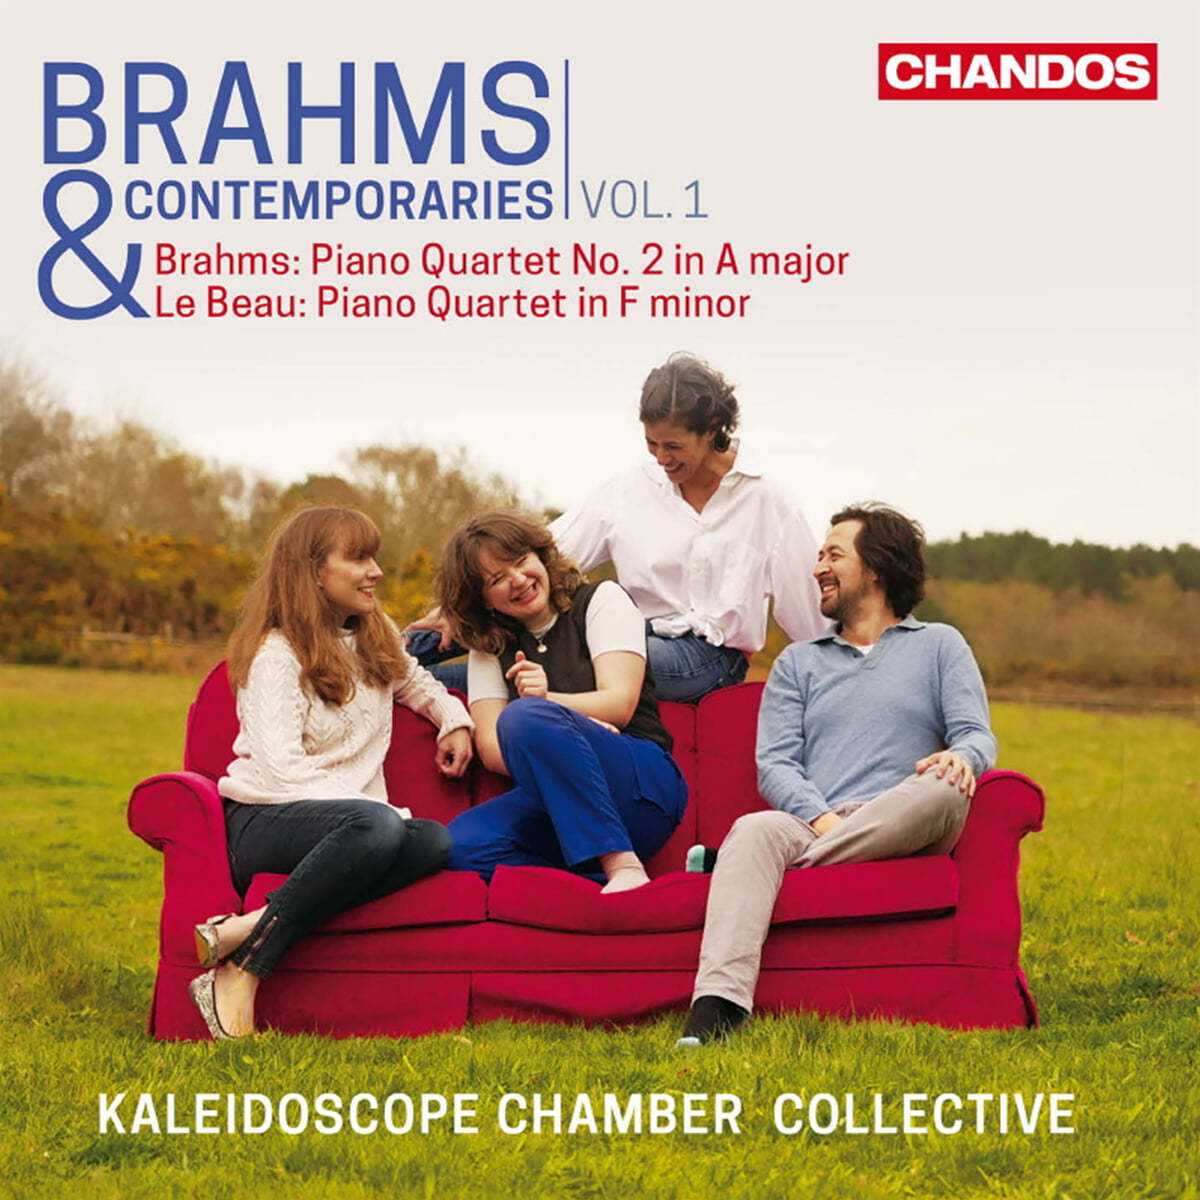 Kaleidoscope Chamber Collective 브람스와 동시대인 Vol.1 (Brahms & Contemporaries Vol.1)